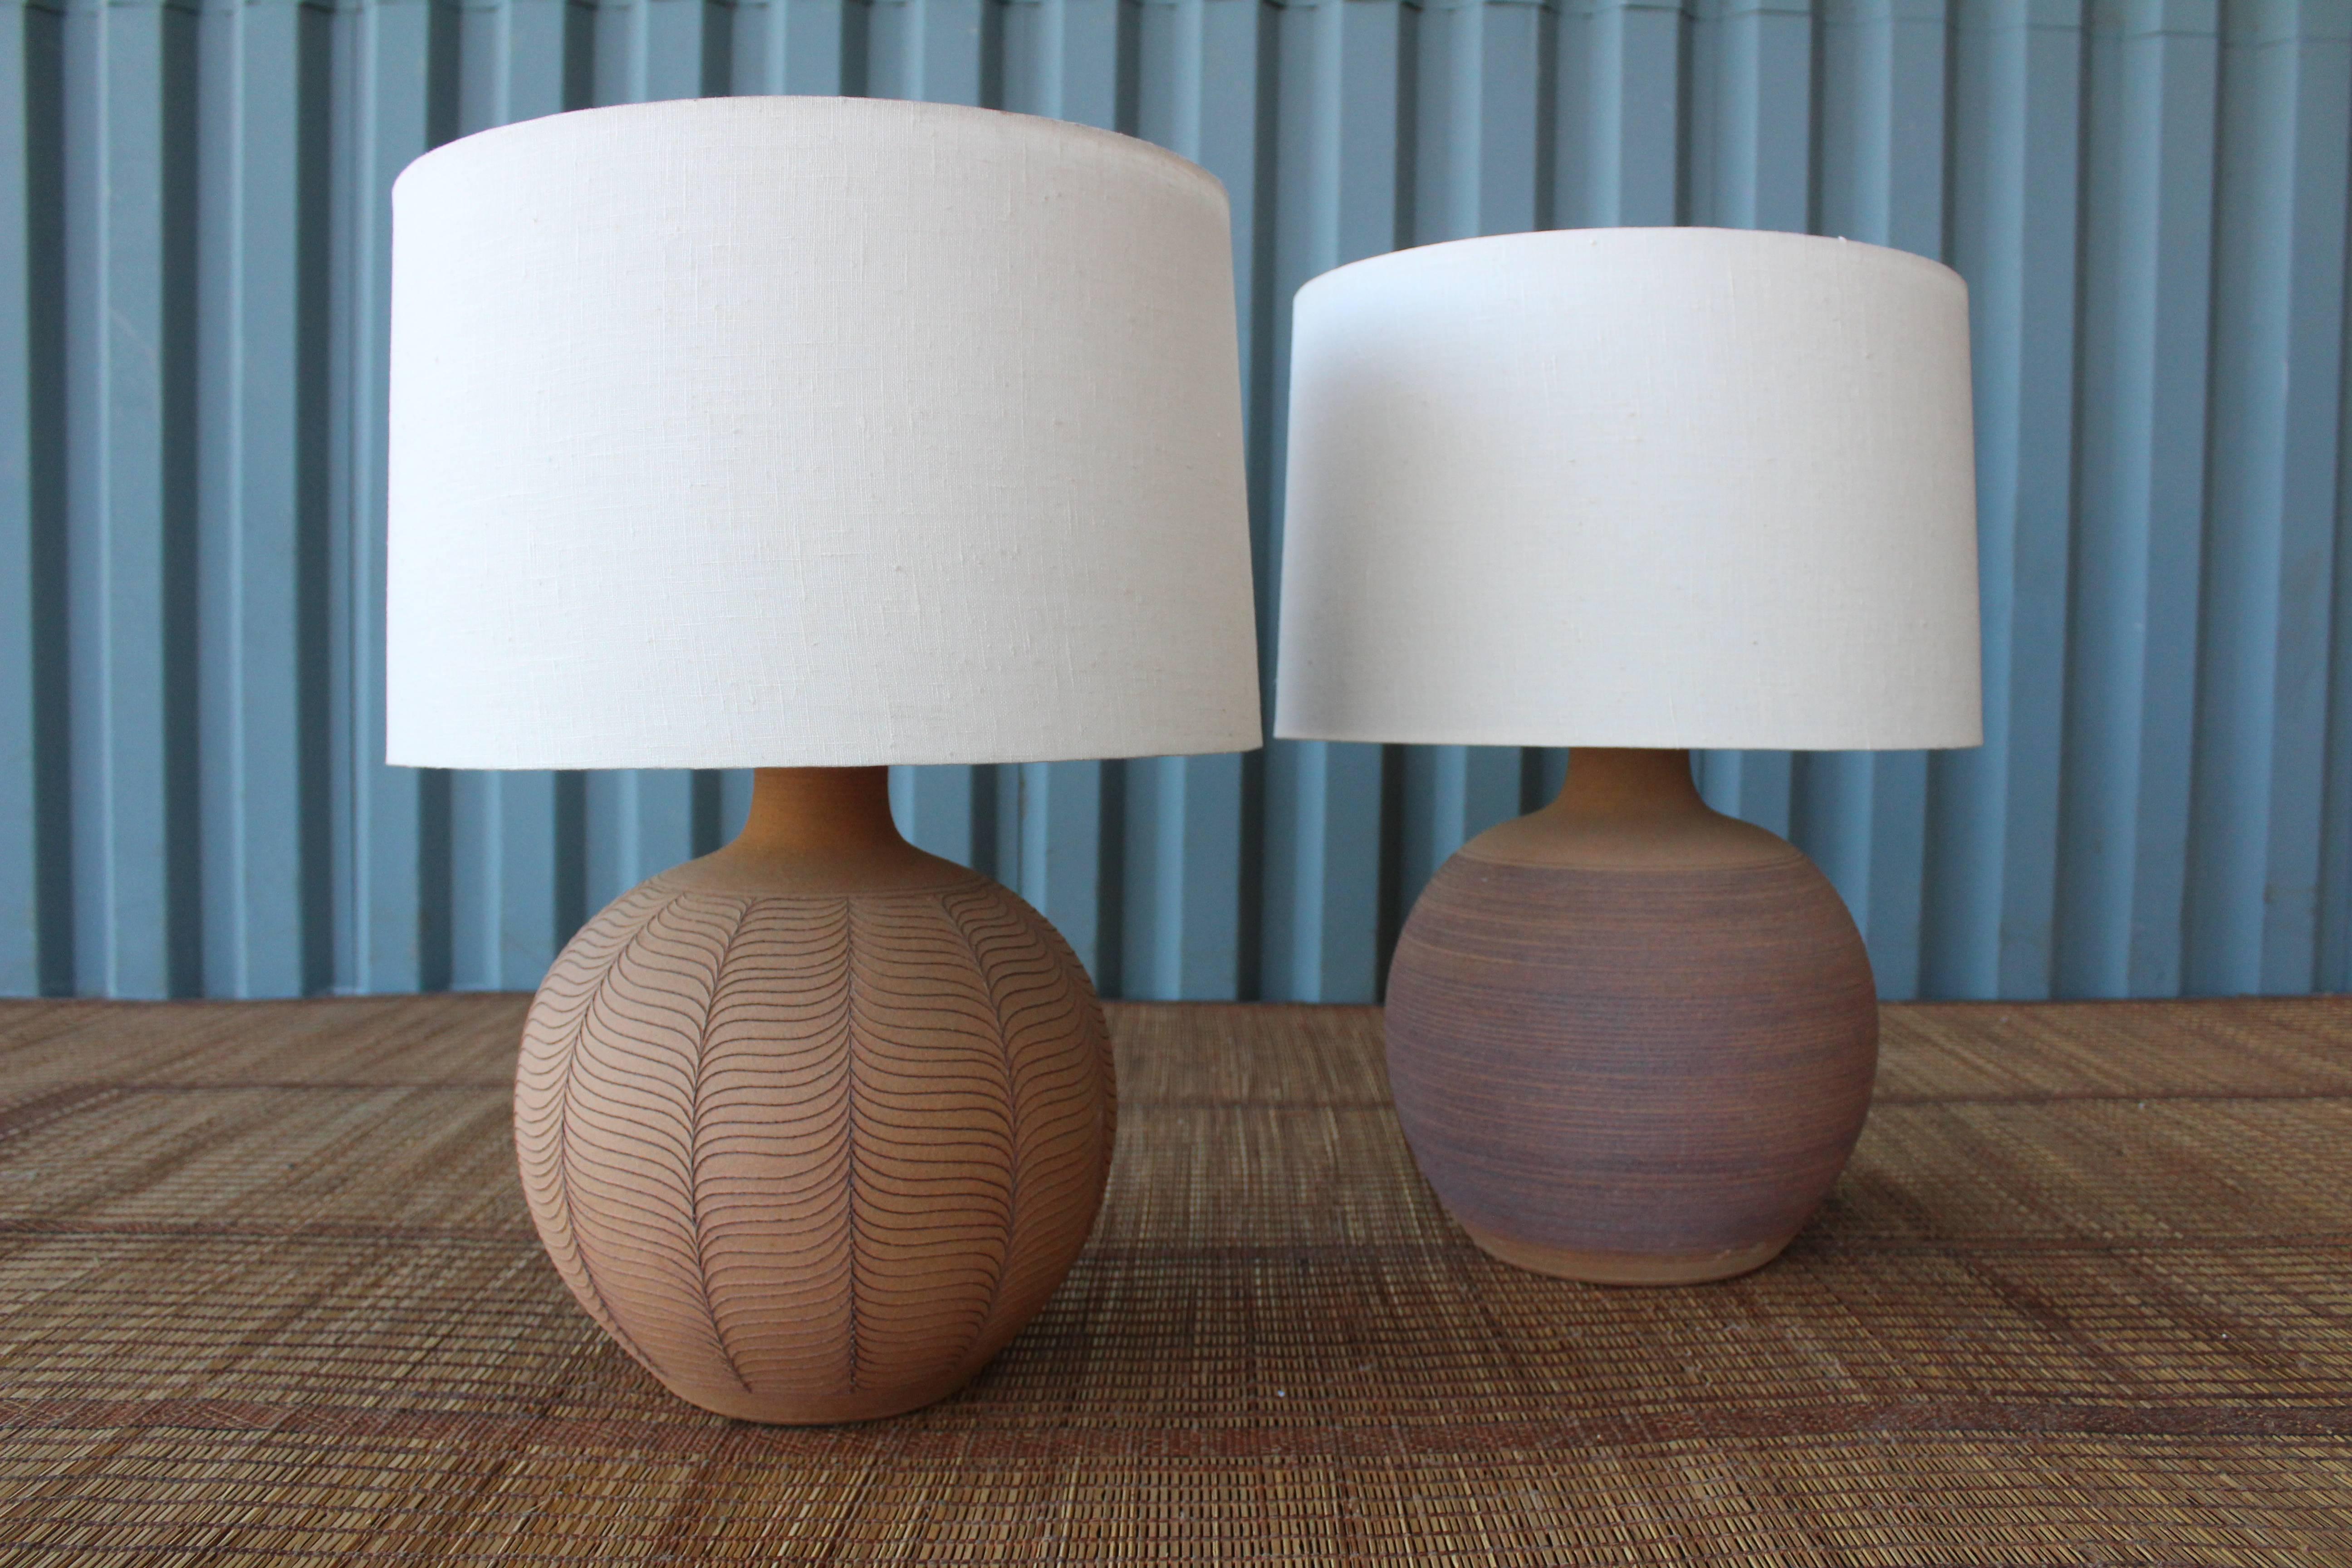 Pair of beautiful hand thrown 1970s terracotta Studio Pottery table lamps. Both signed 'Brown' near the bottom of each lamp. The pair come with custom-made linen shades complete with diffusers.